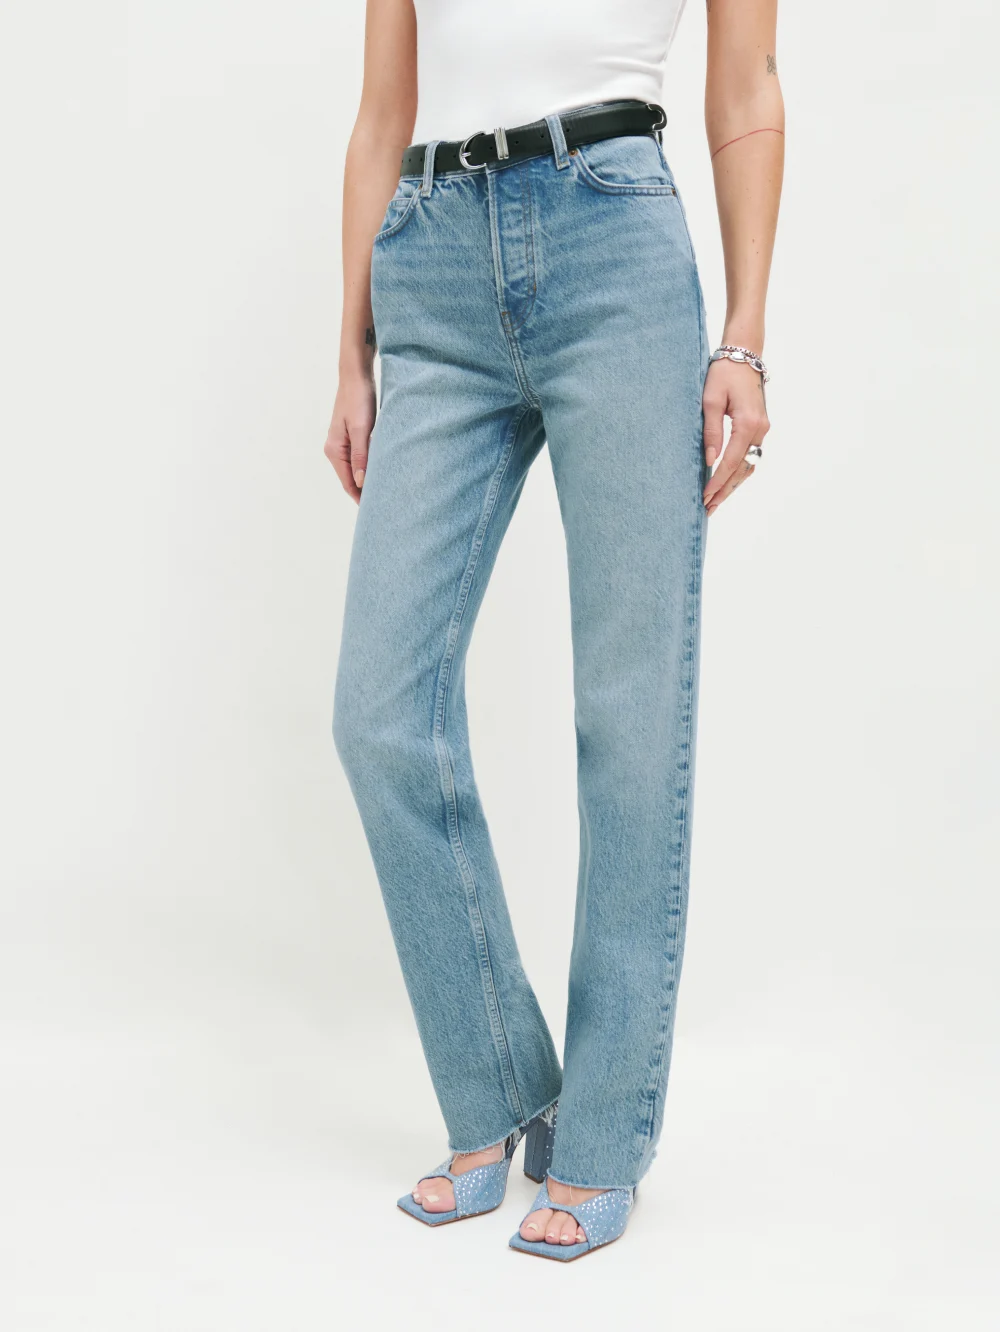 12 Best Jeans for Tall Women That Fit and Flatter